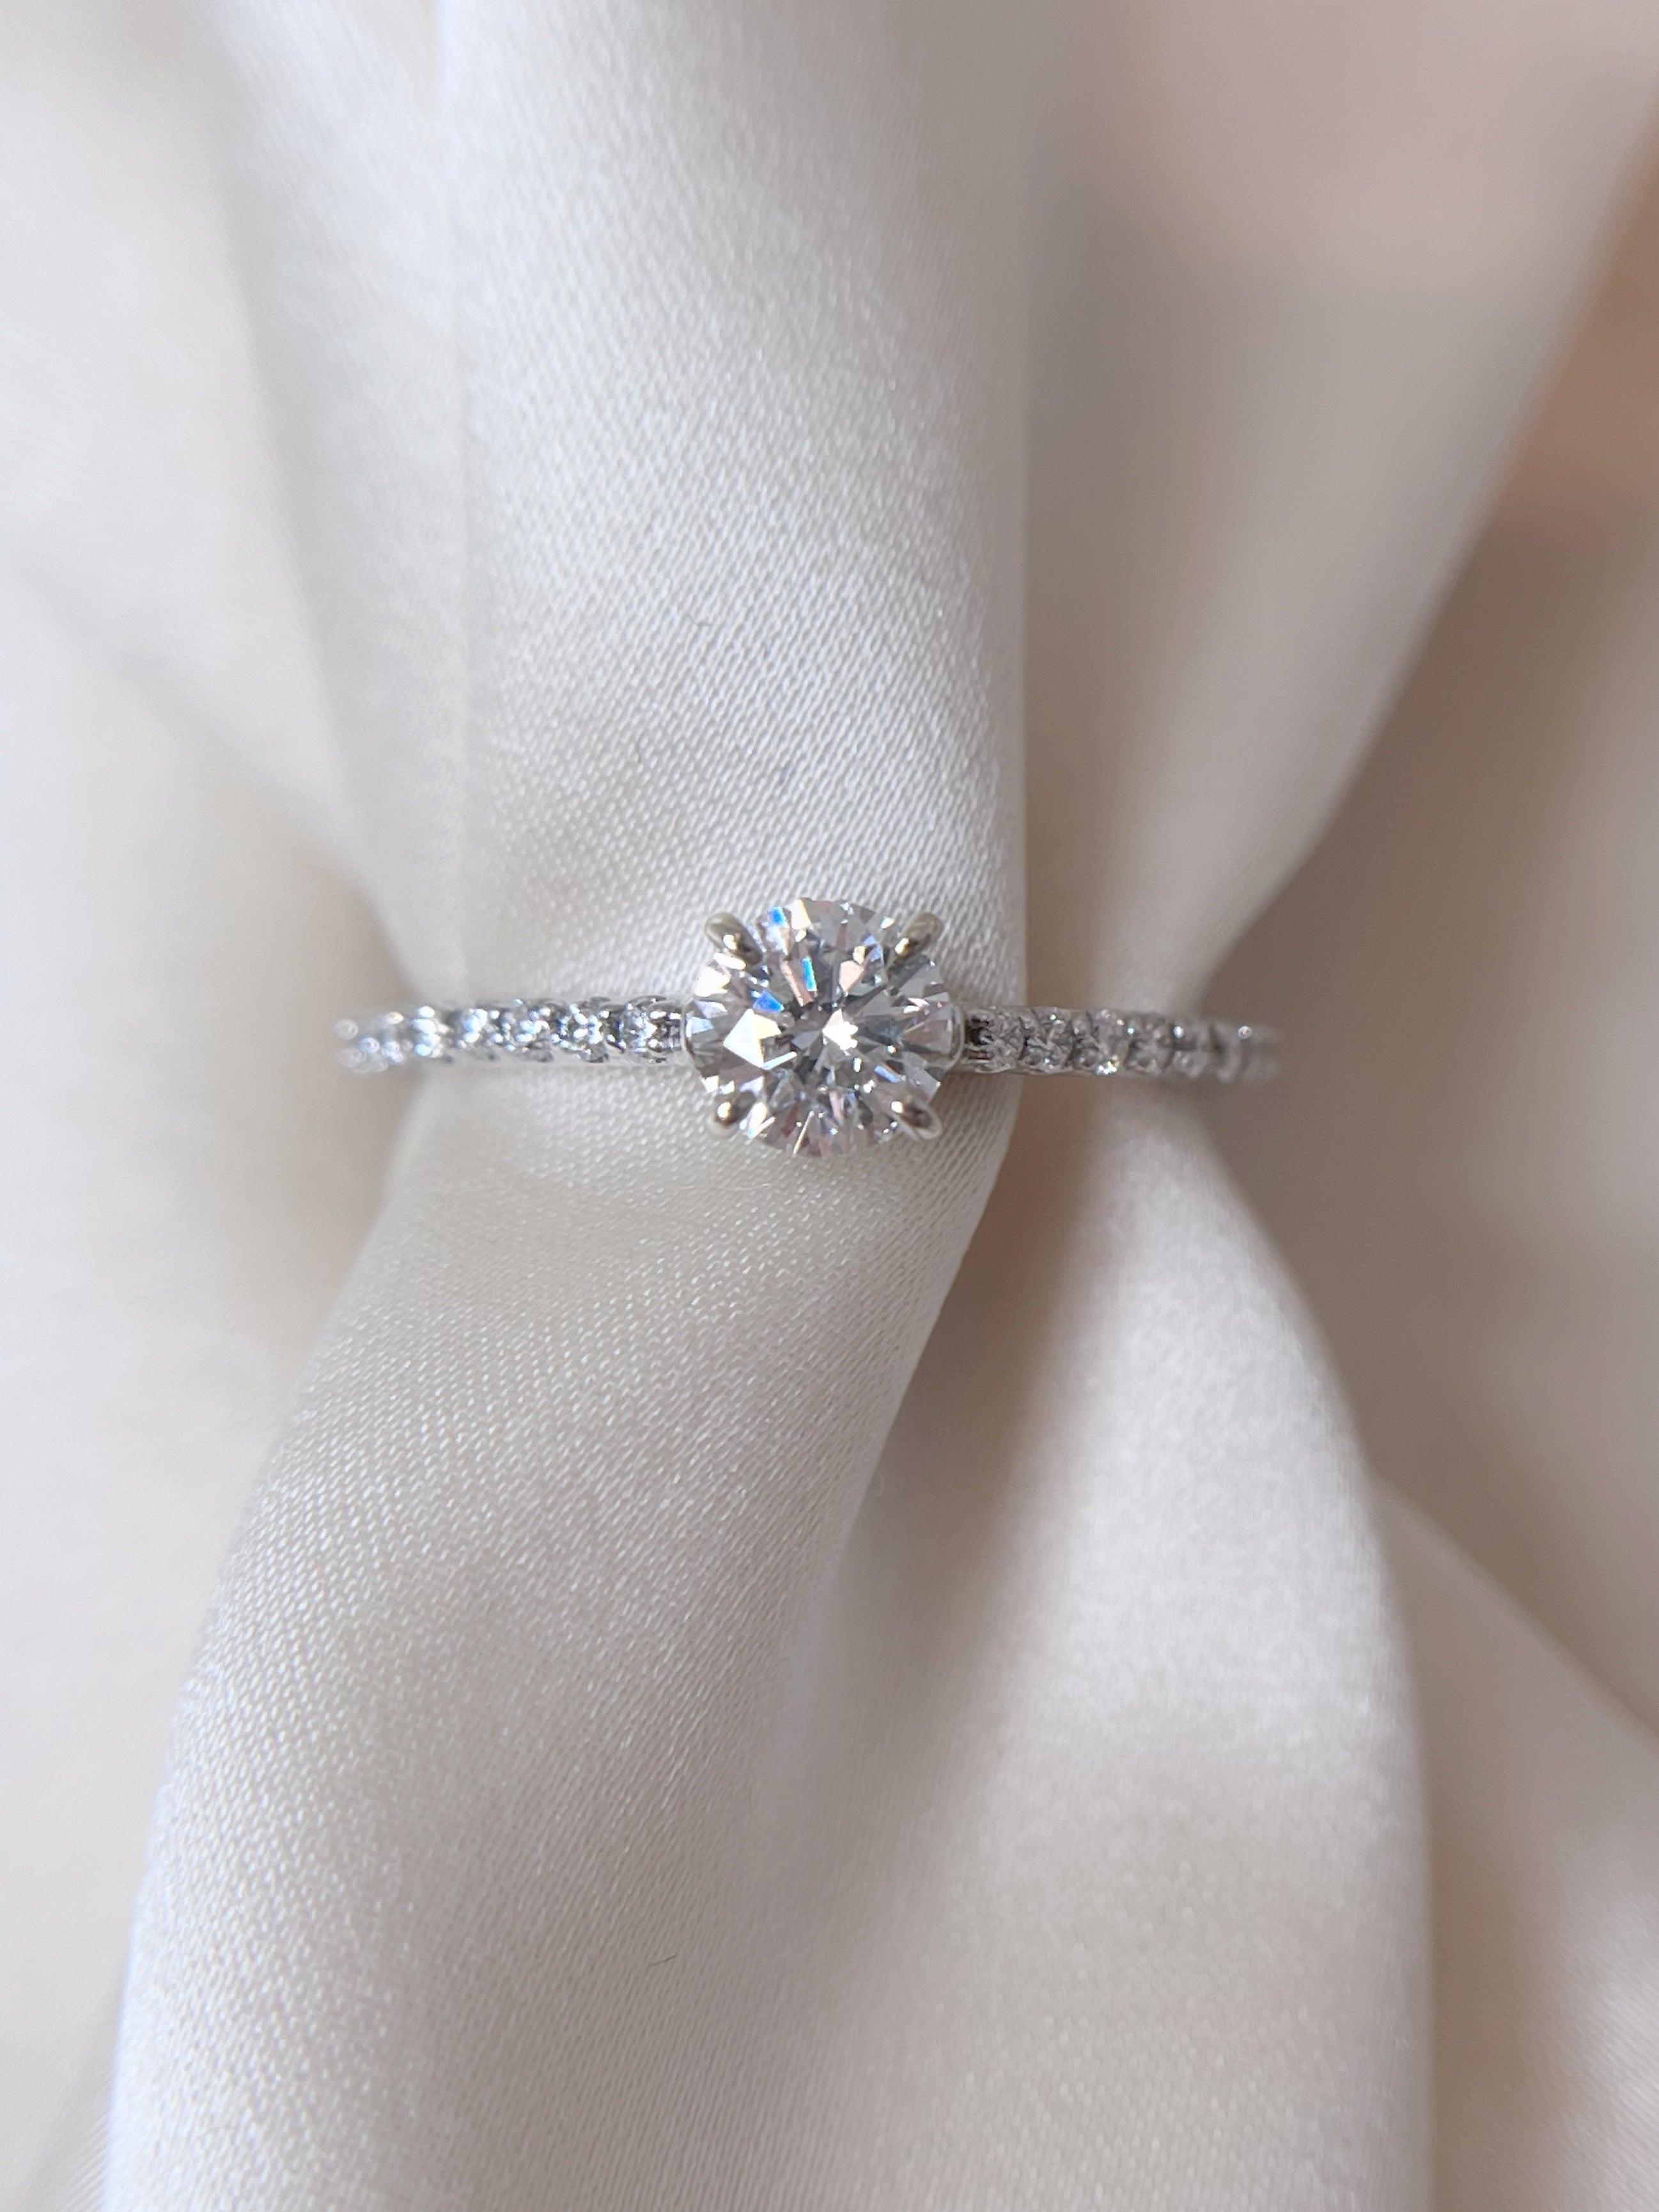 Dainty Engagement Rings For The Minimalist Soonlywed | Love Inc. Mag